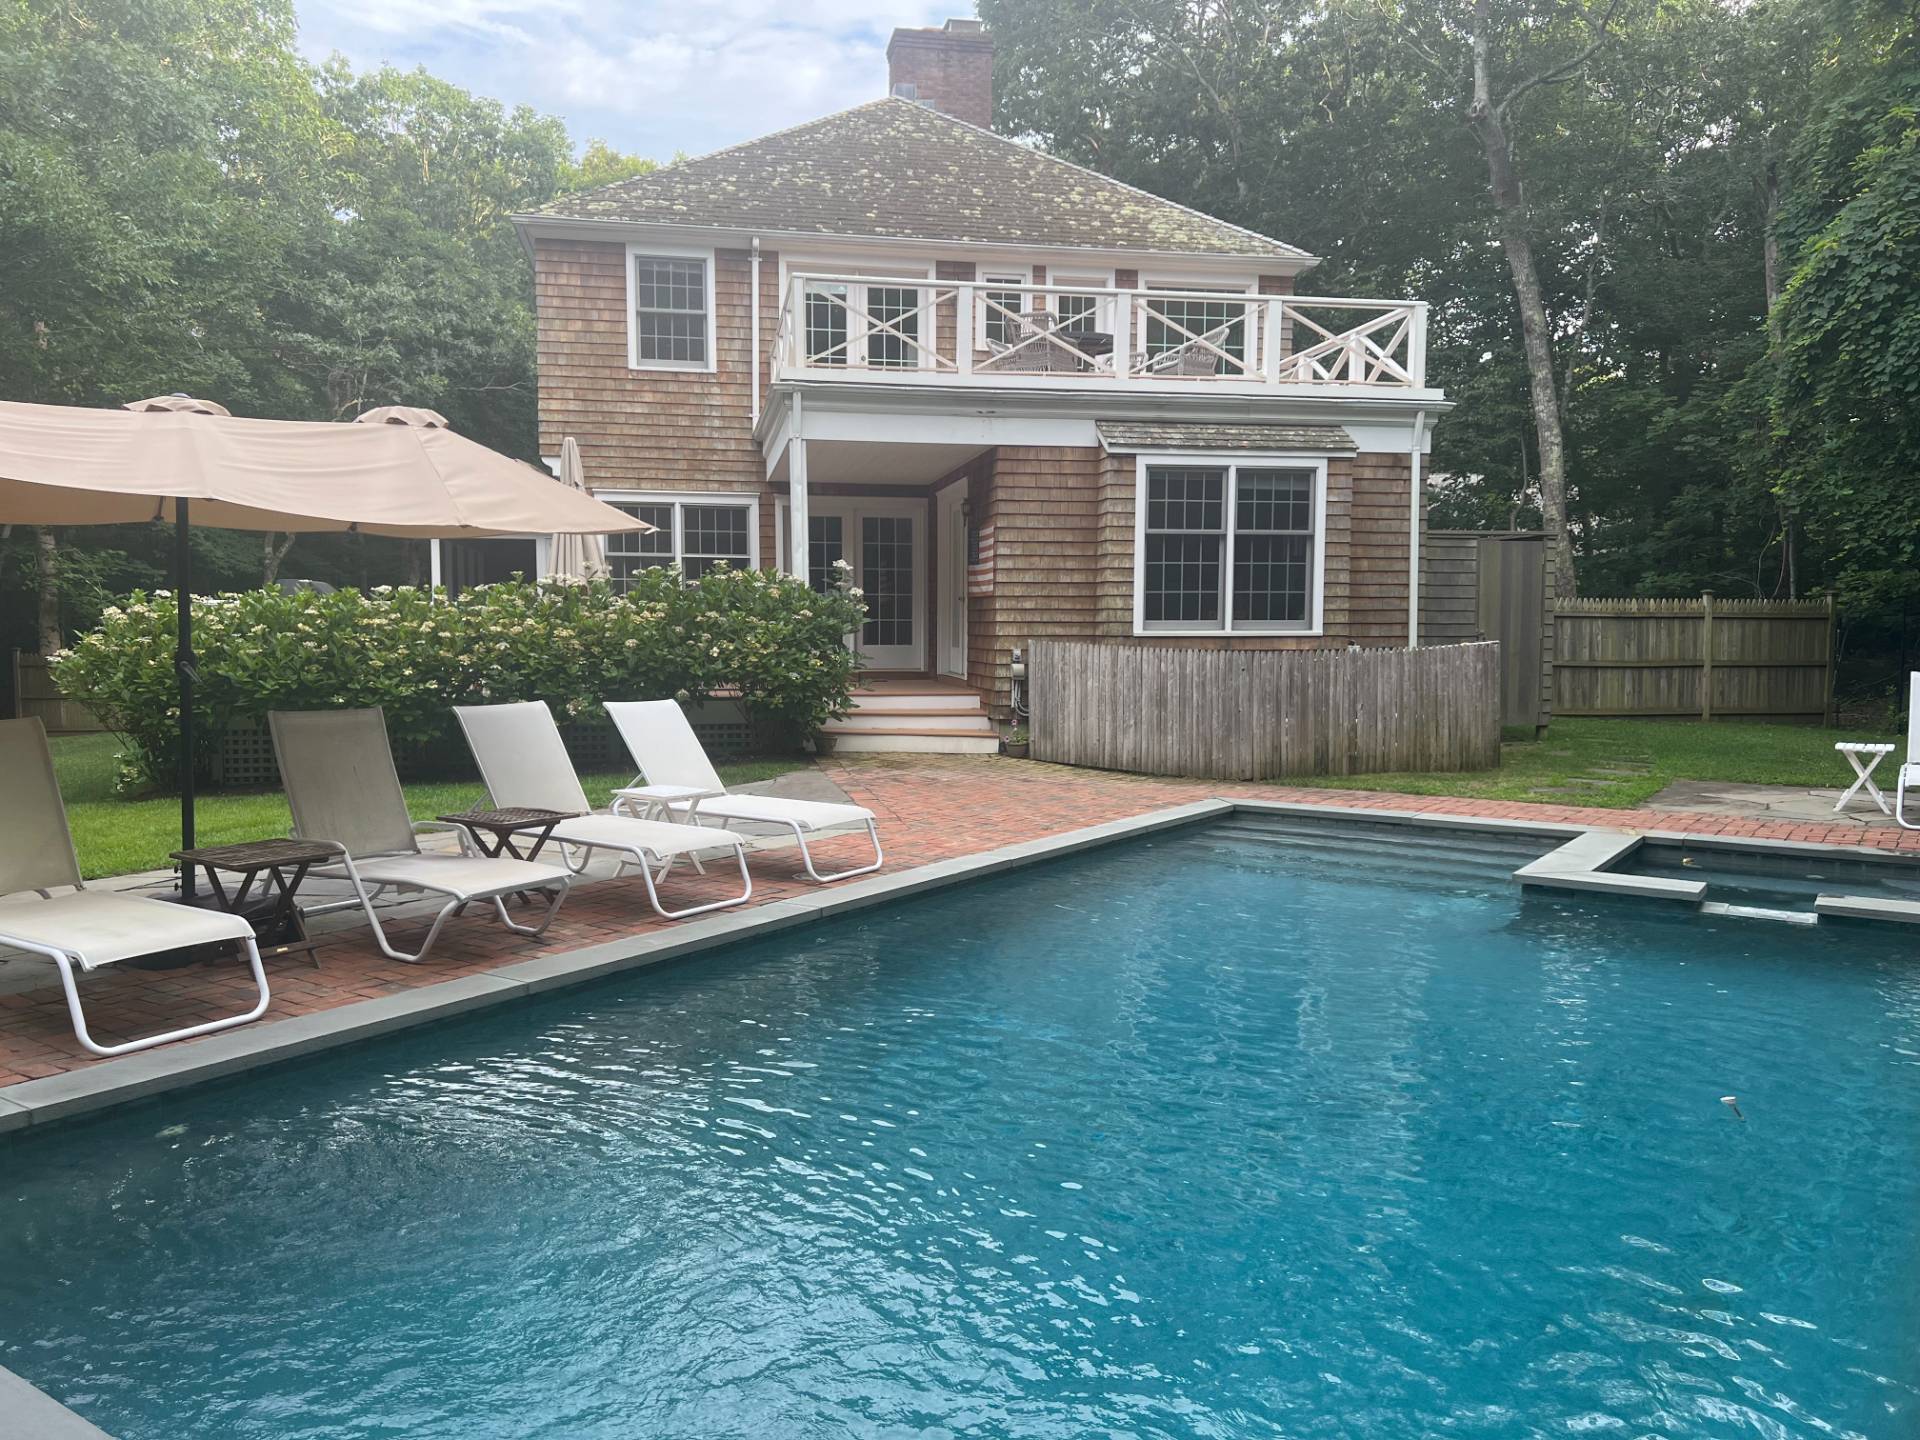 a view of a house with swimming pool and porch